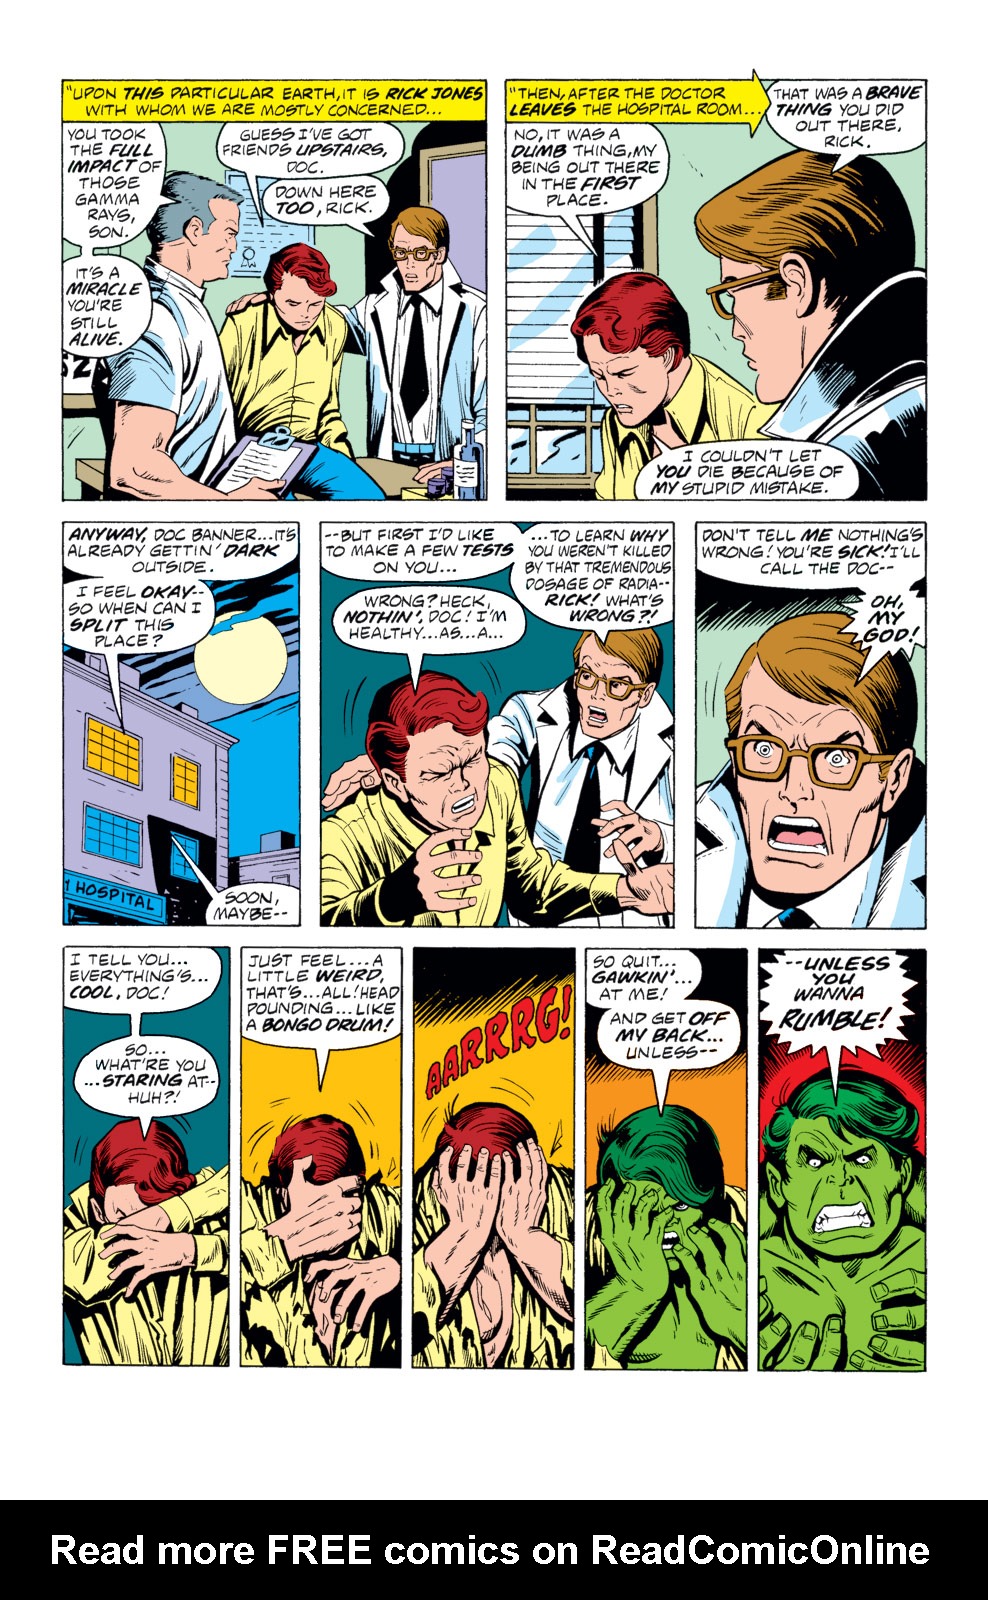 What If? (1977) issue 12 - Rick Jones had become the Hulk - Page 4